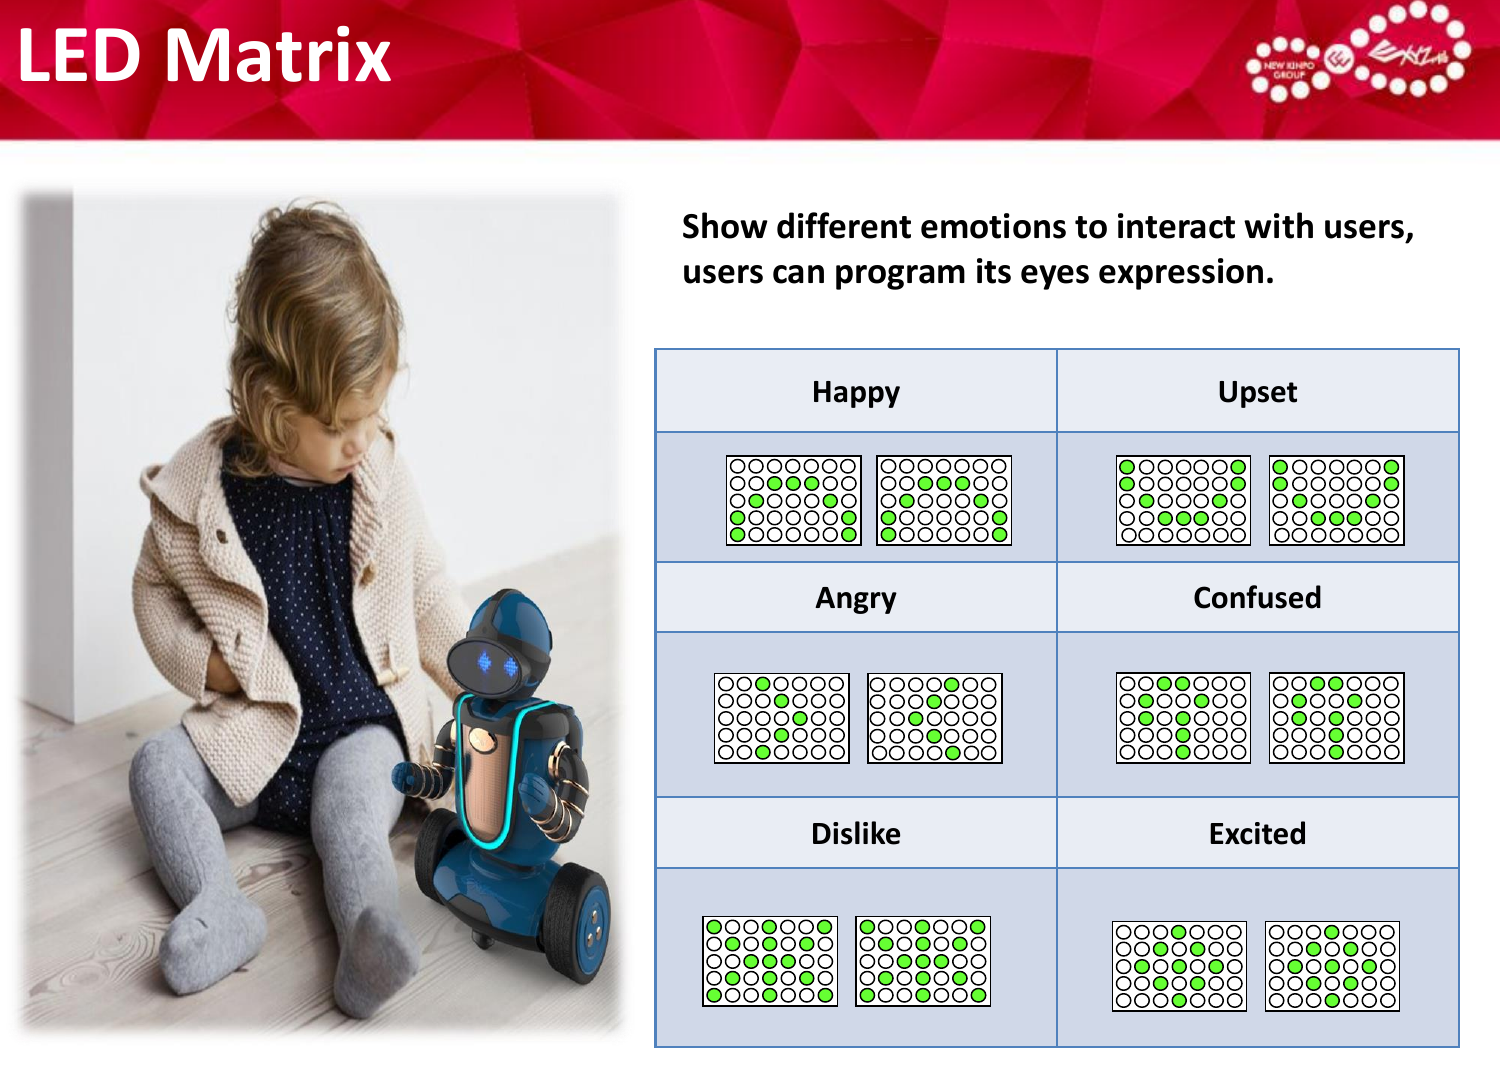 LED MatrixShow different emotions to interact with users, users can program its eyes expression.Happy  UpsetAngry ConfusedDislike Excited